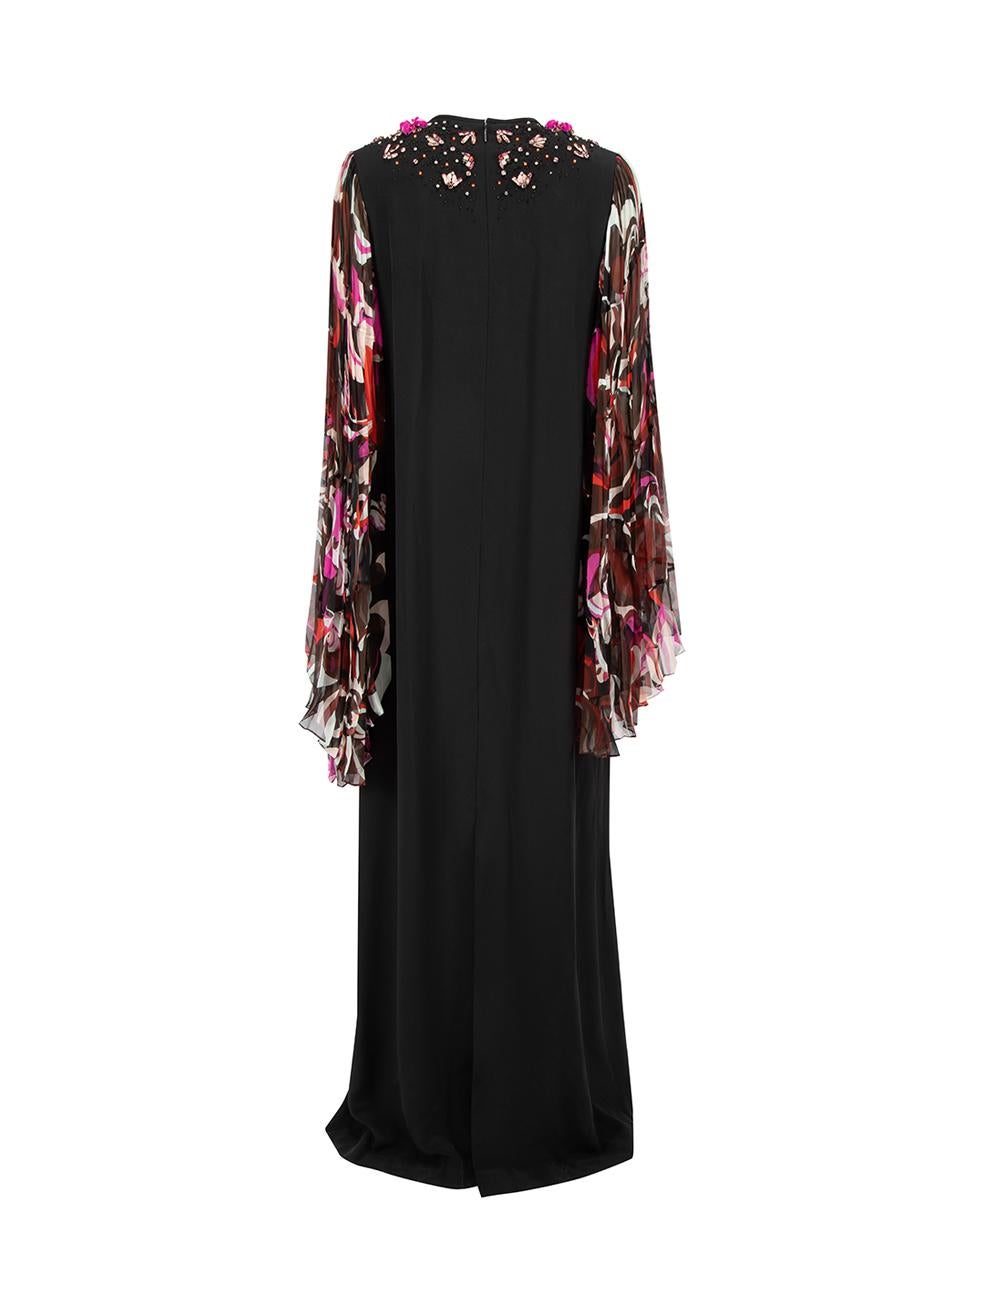 Pre-Loved Emilio Pucci Women's Beaded Black Silk Maxi Dress with Patterned Sleev In Excellent Condition In London, GB